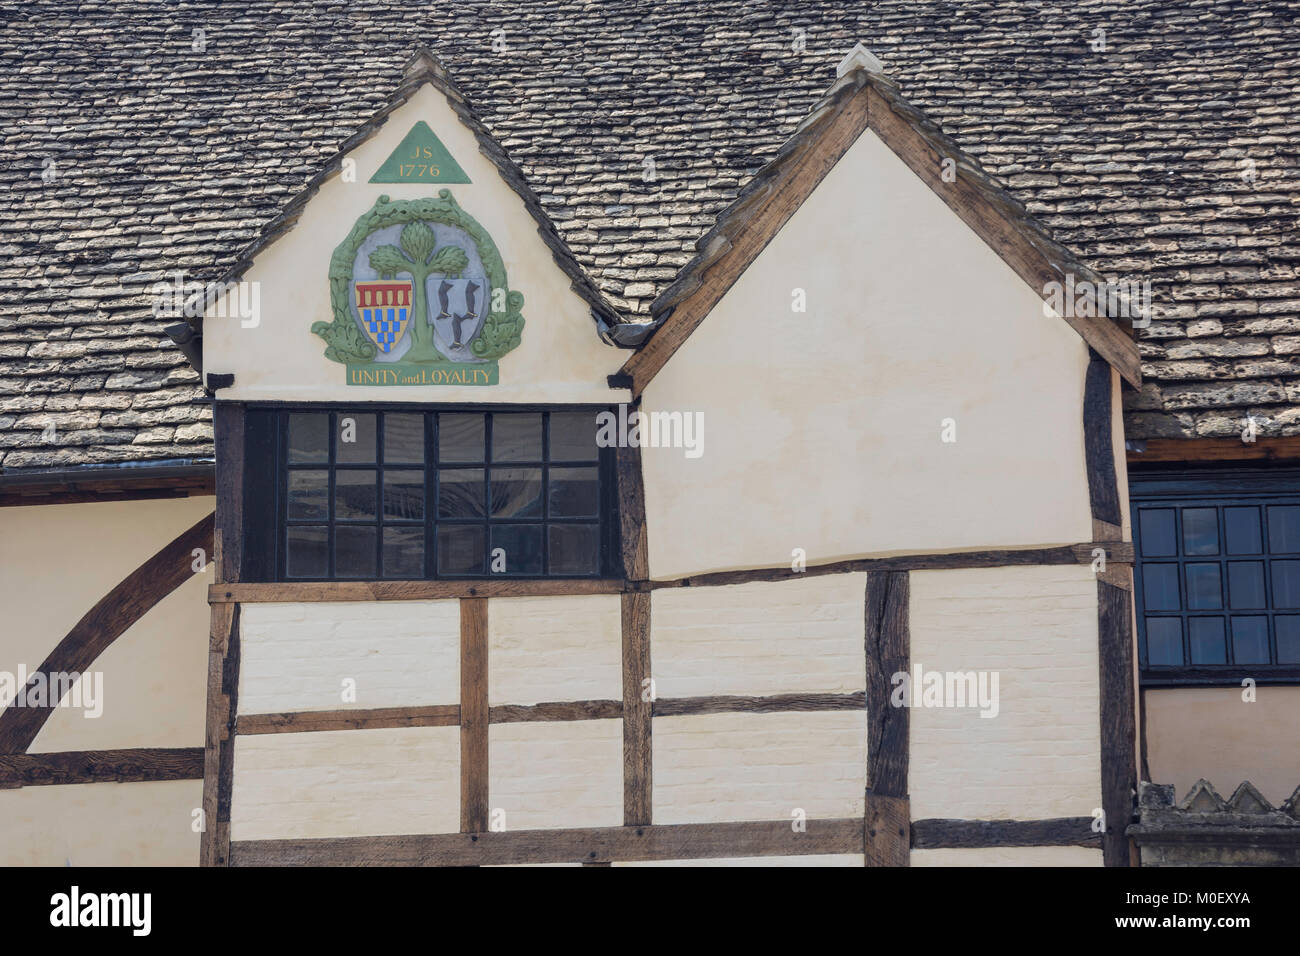 Town Arms on 15th century The Yelde Hall, The Shambles, Chippenham, Wiltshire, England, United Kingdom Stock Photo